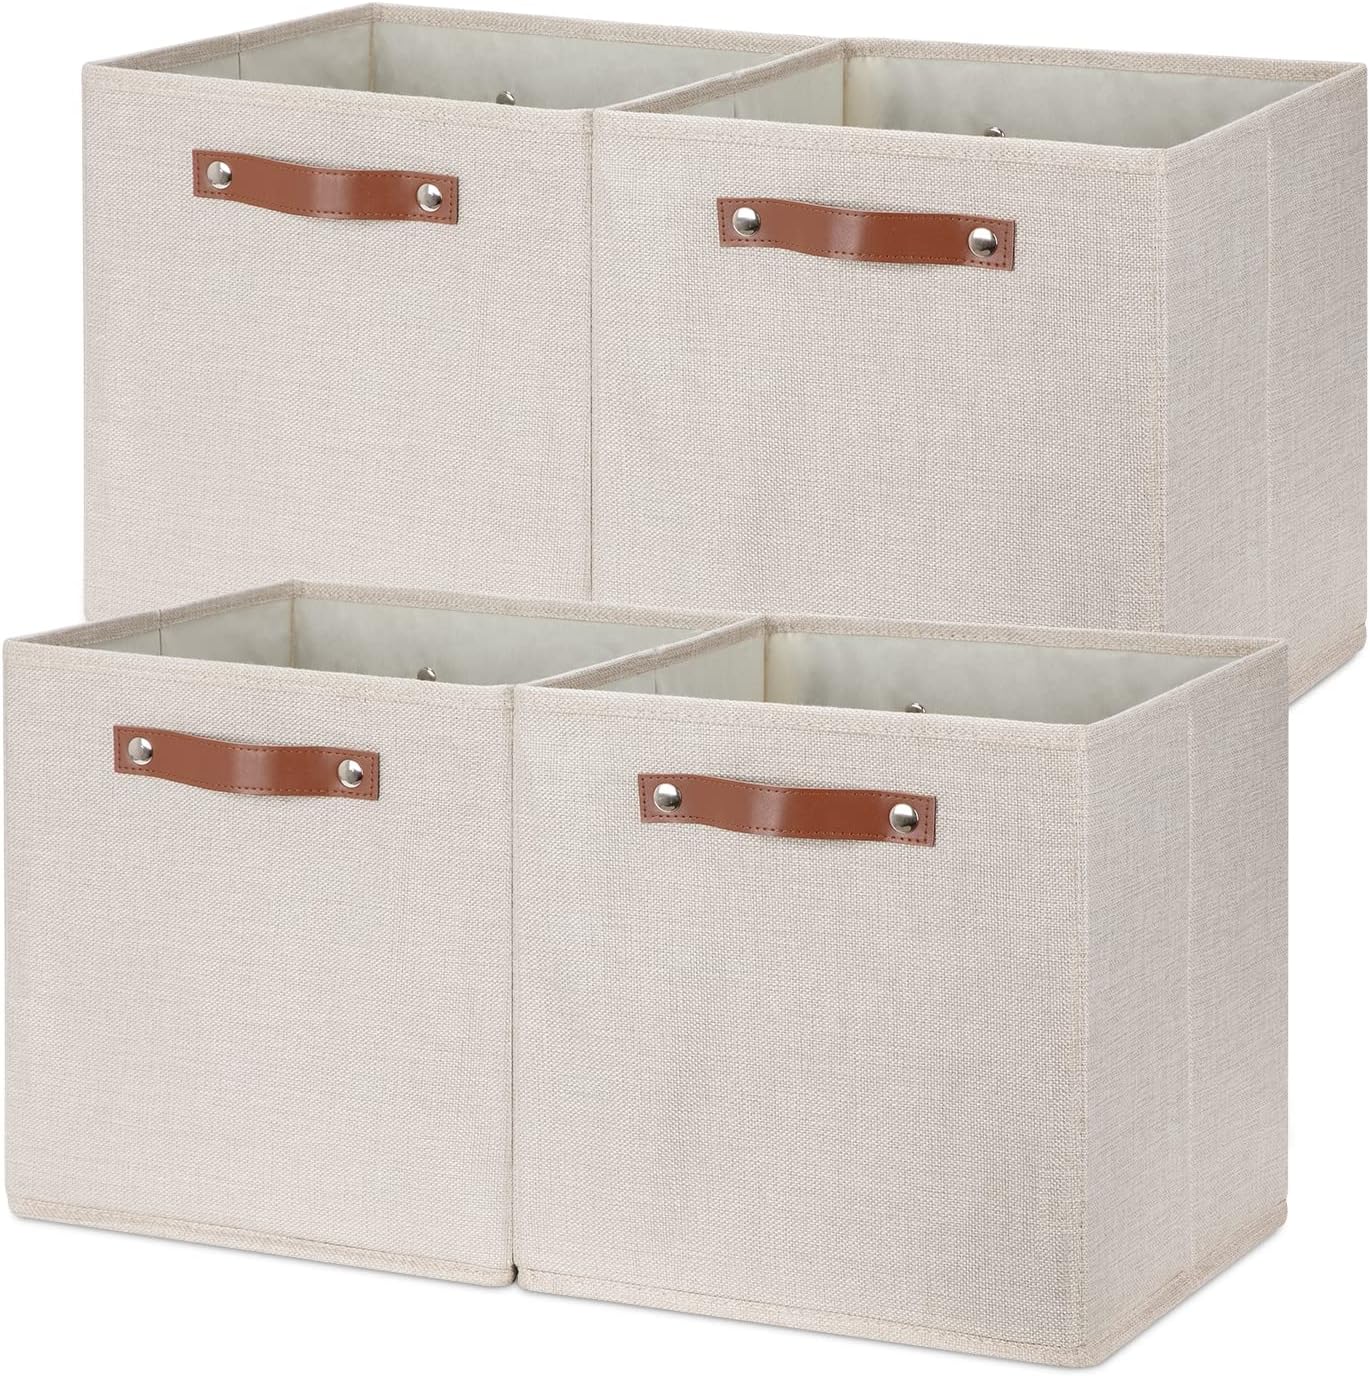 Temary Cube Storage Bins 12 Inch Storage Cubes 4PCs Fabric Organizer Bins Boxes with Handles, Sturdy Collapsible Closet Storage Organizer for Shelf, Bedroom, Cabinet (Beige, 12 x 12 x 12)